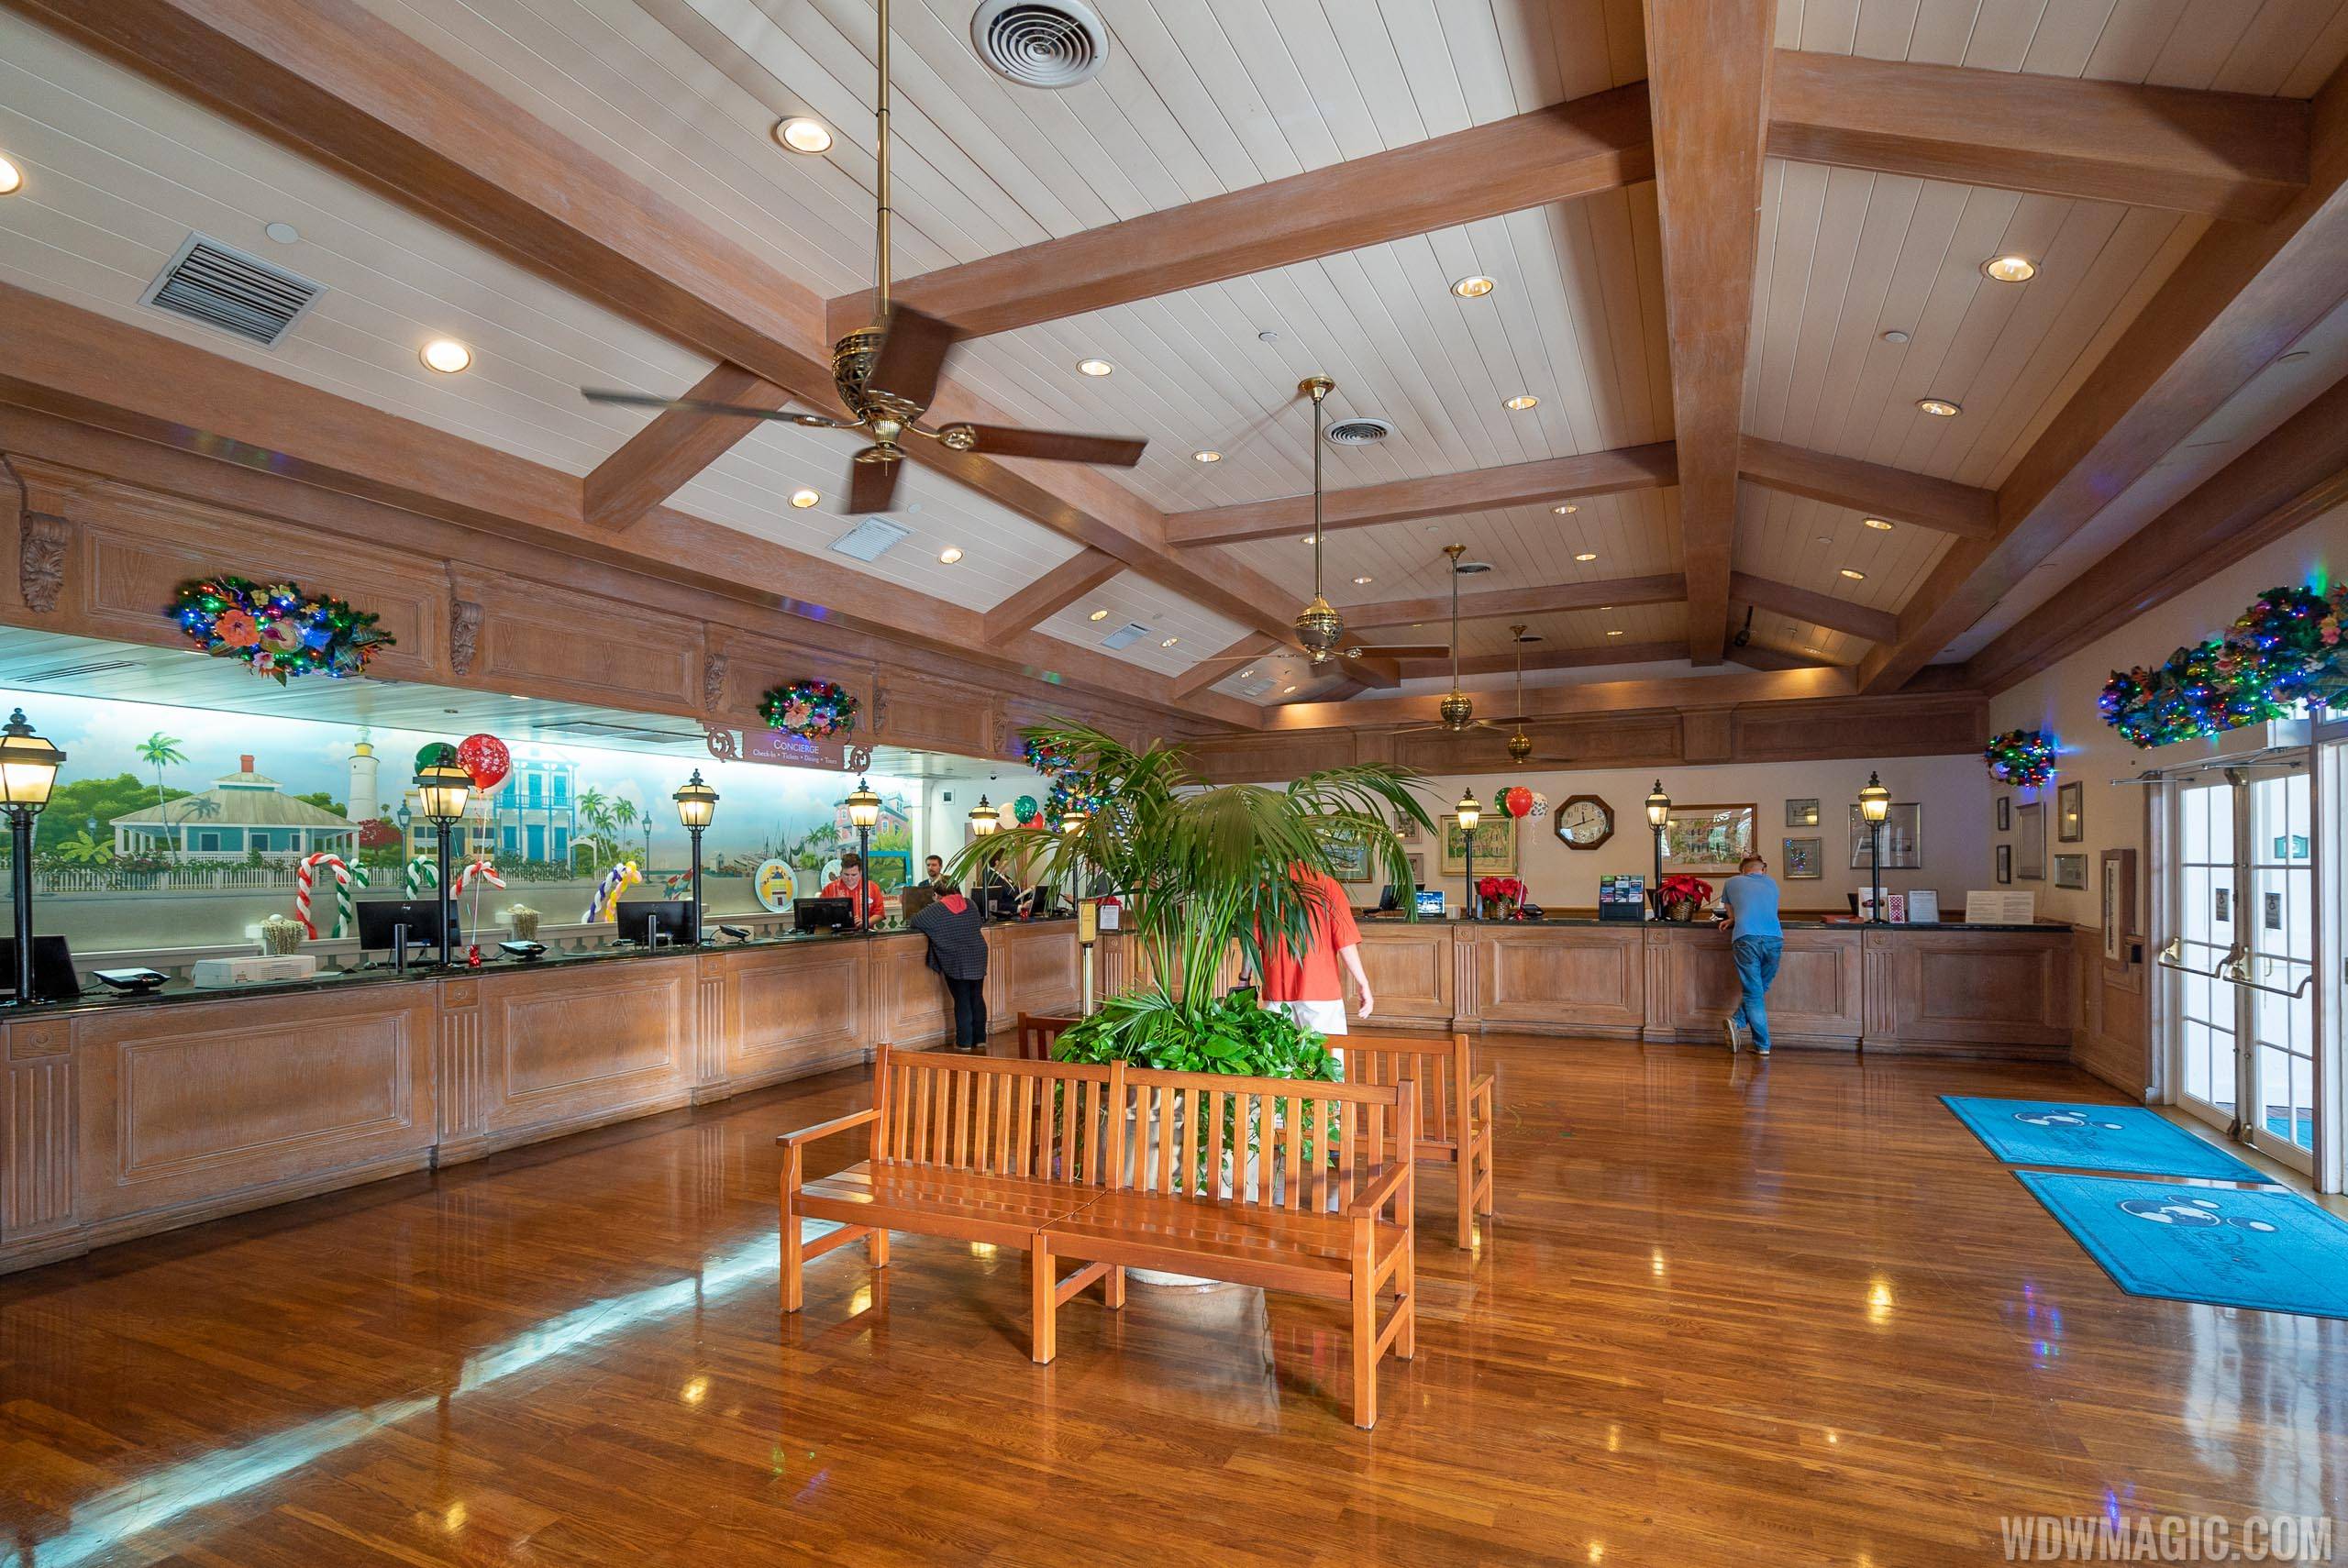 The existing lobby at Old Key West will be updated with new smaller counters